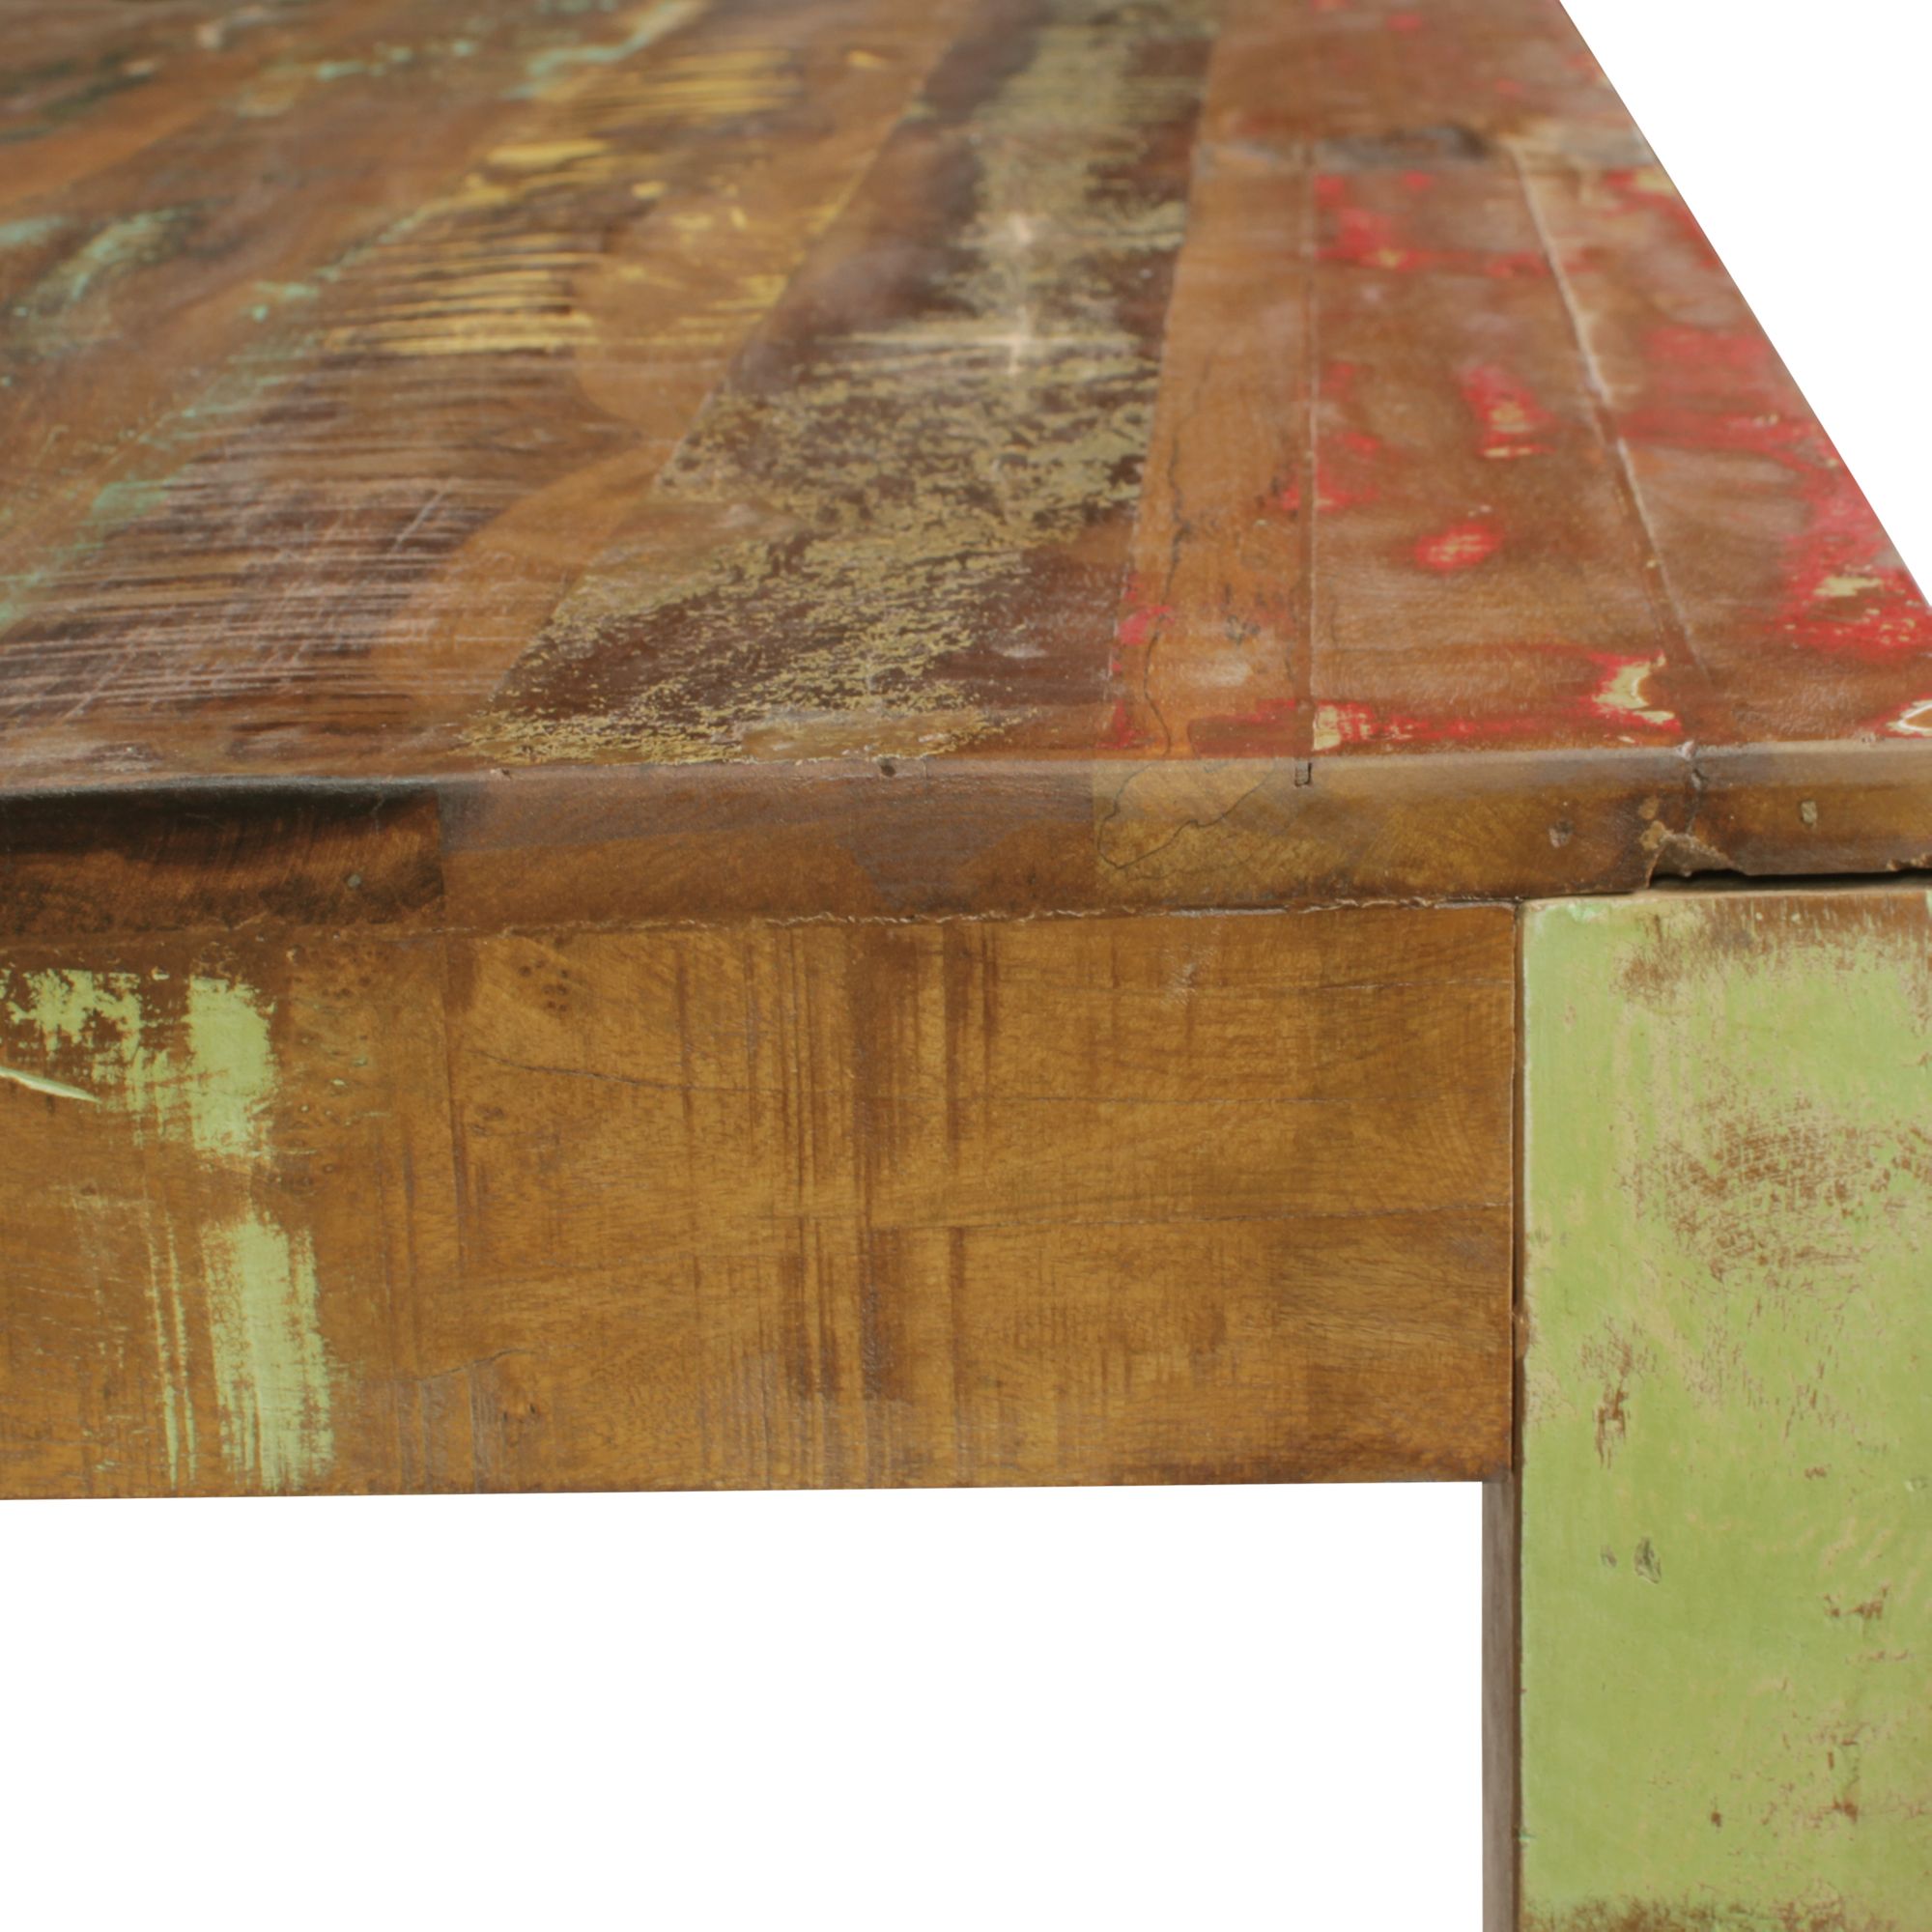 salontafel recycled hout